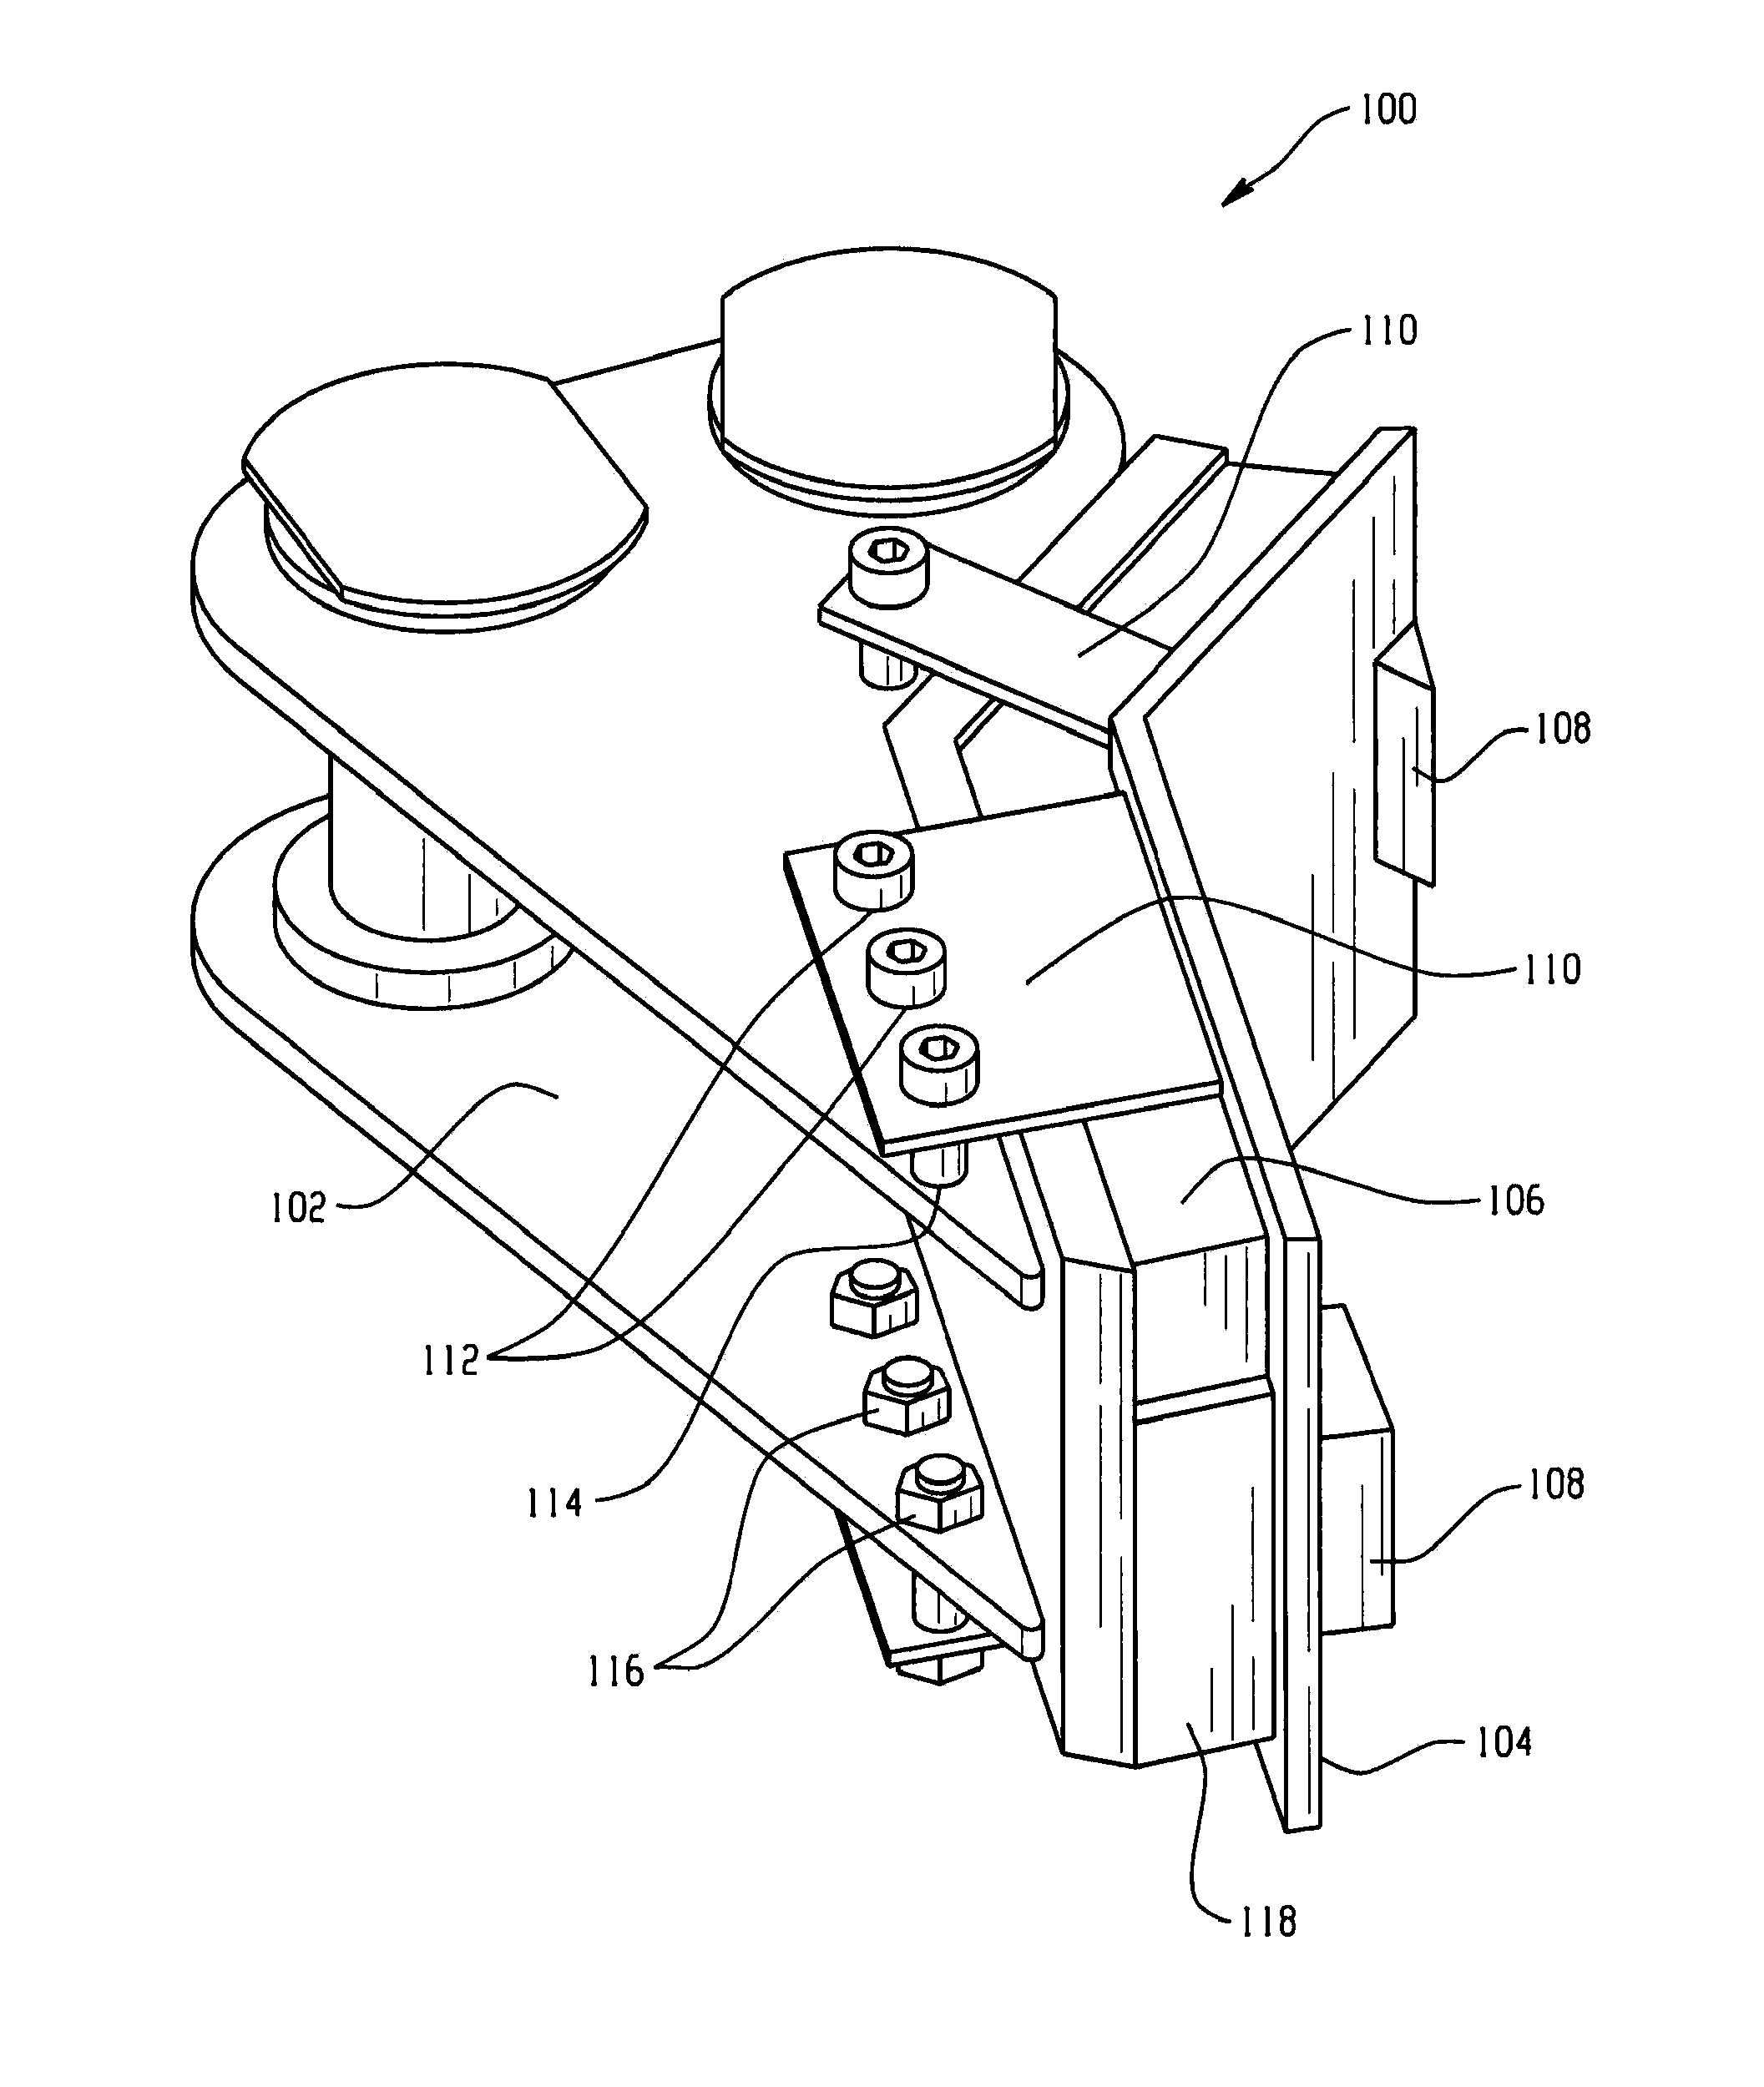 Gripper assembly for a manipulator and method of use